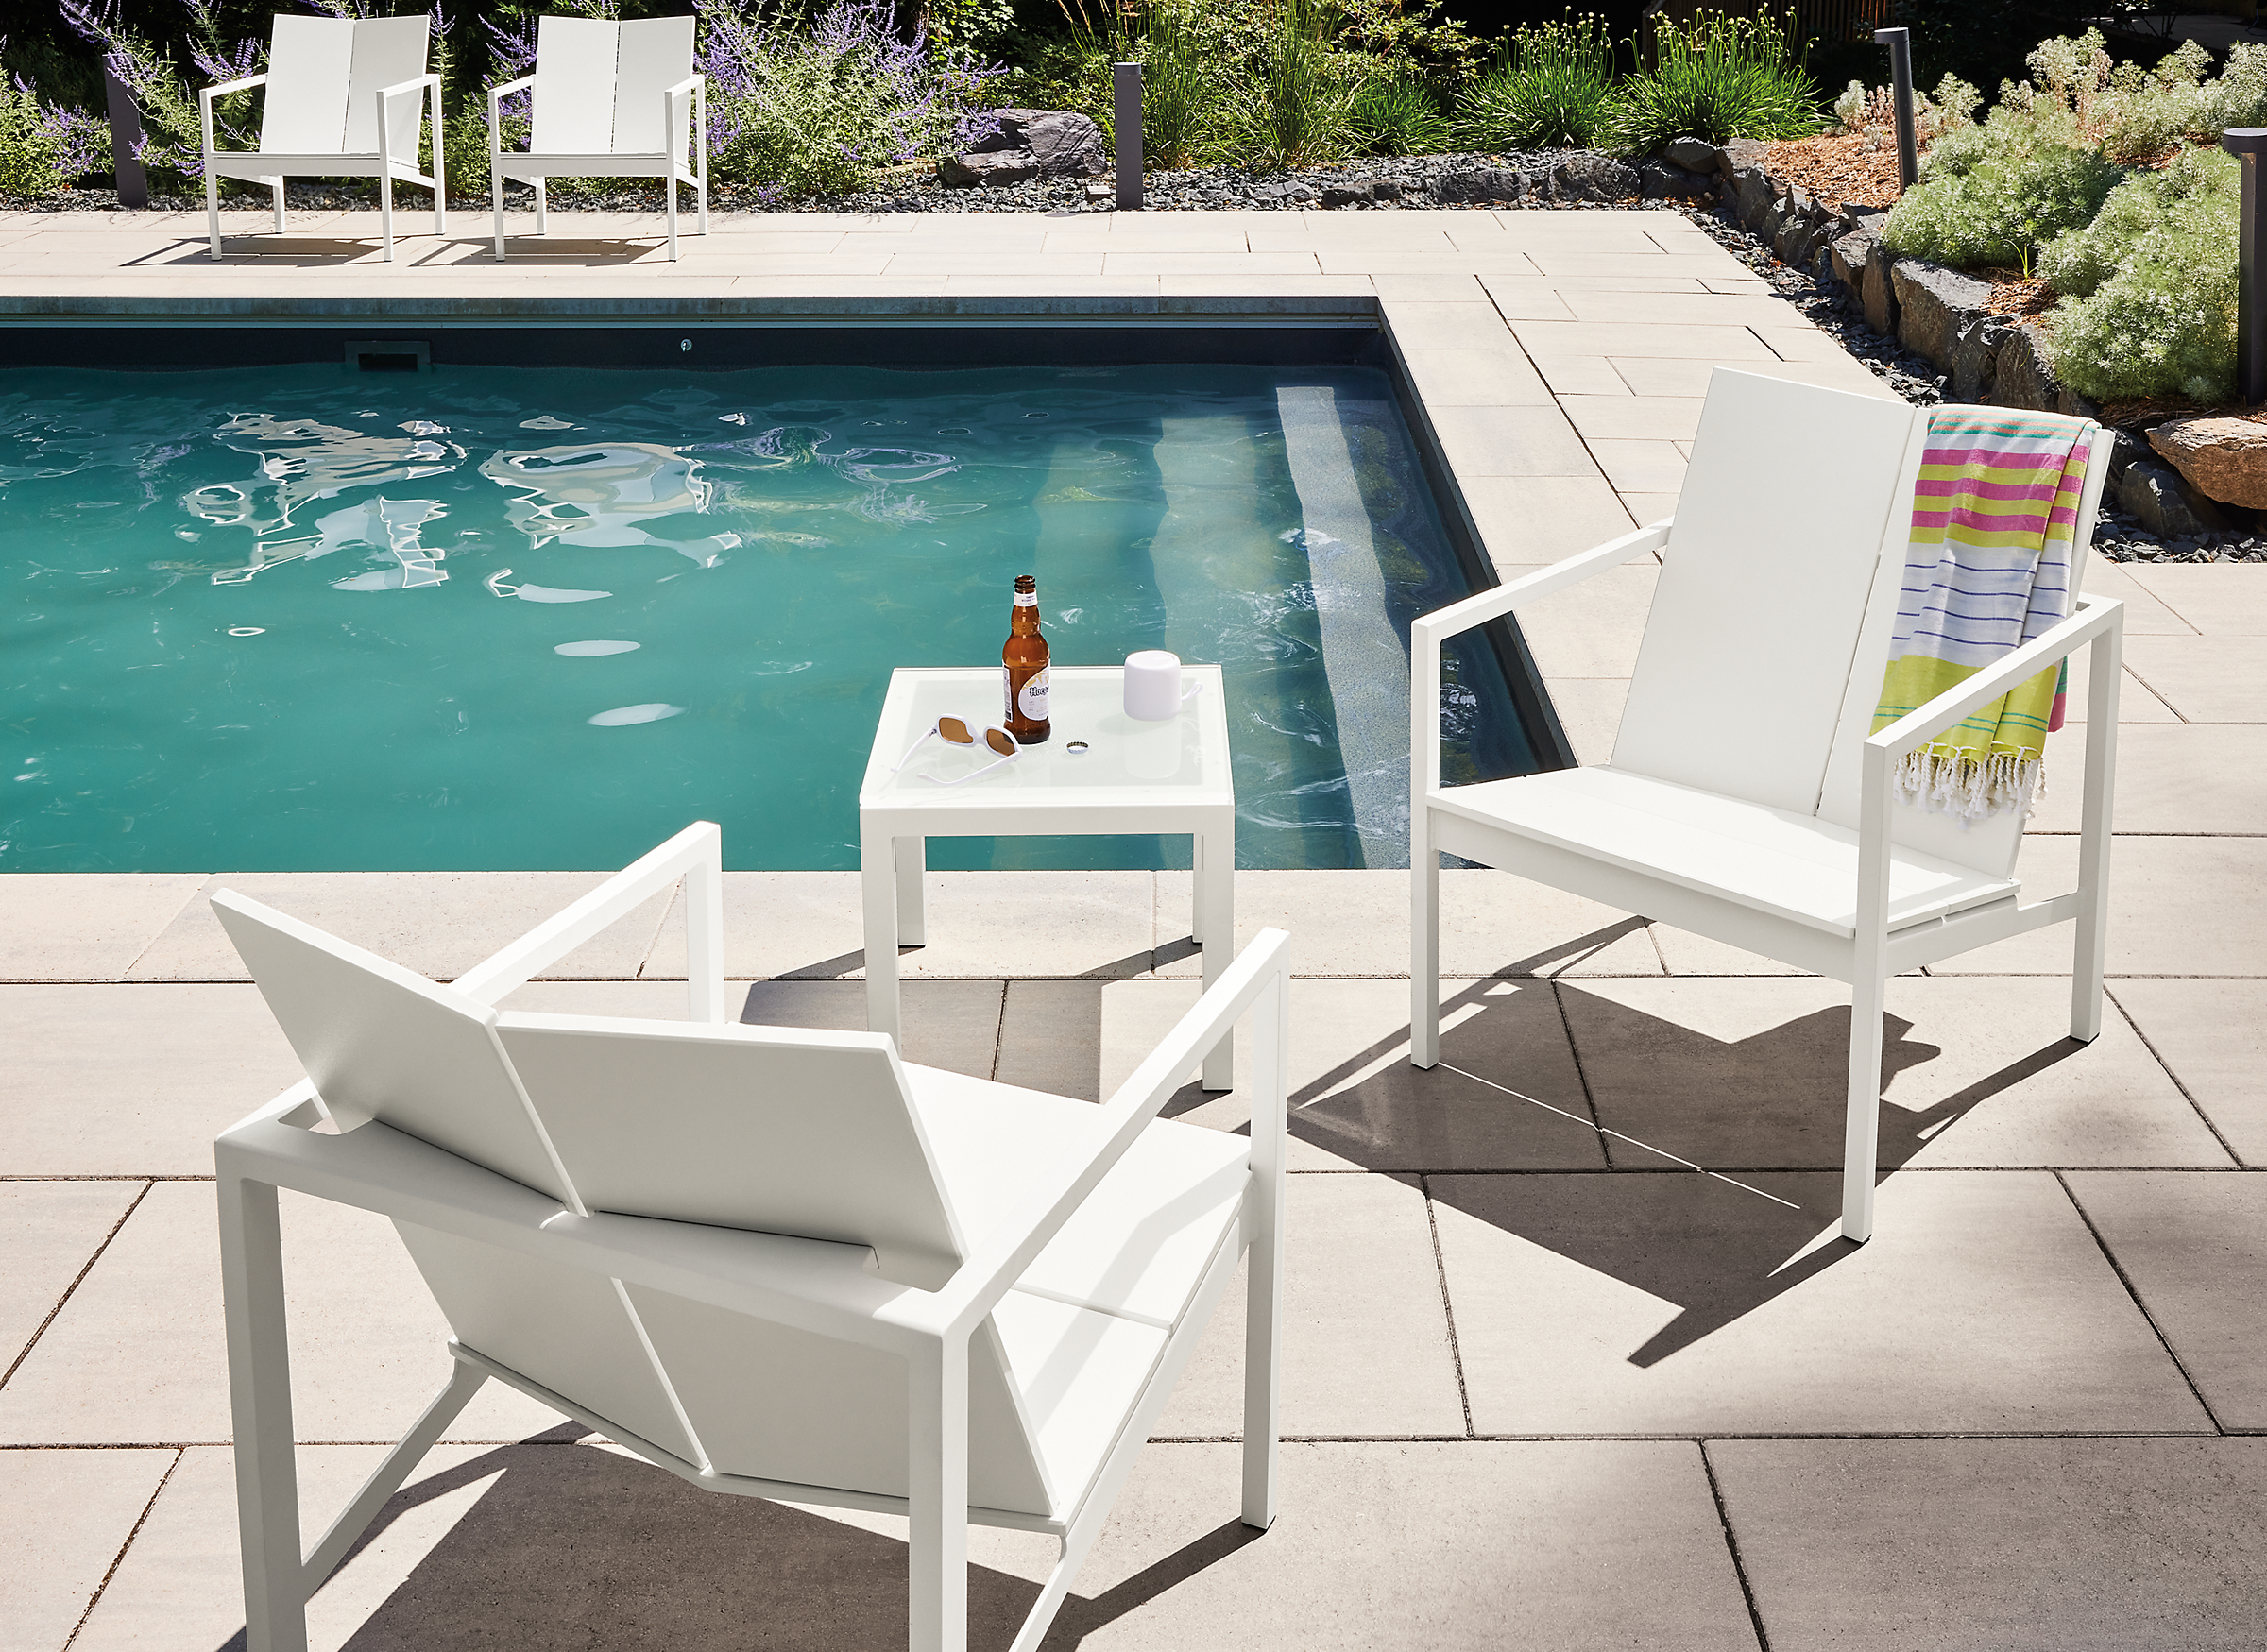 Outdoor space with mattix chairs by pool and a small parsons coffee table.